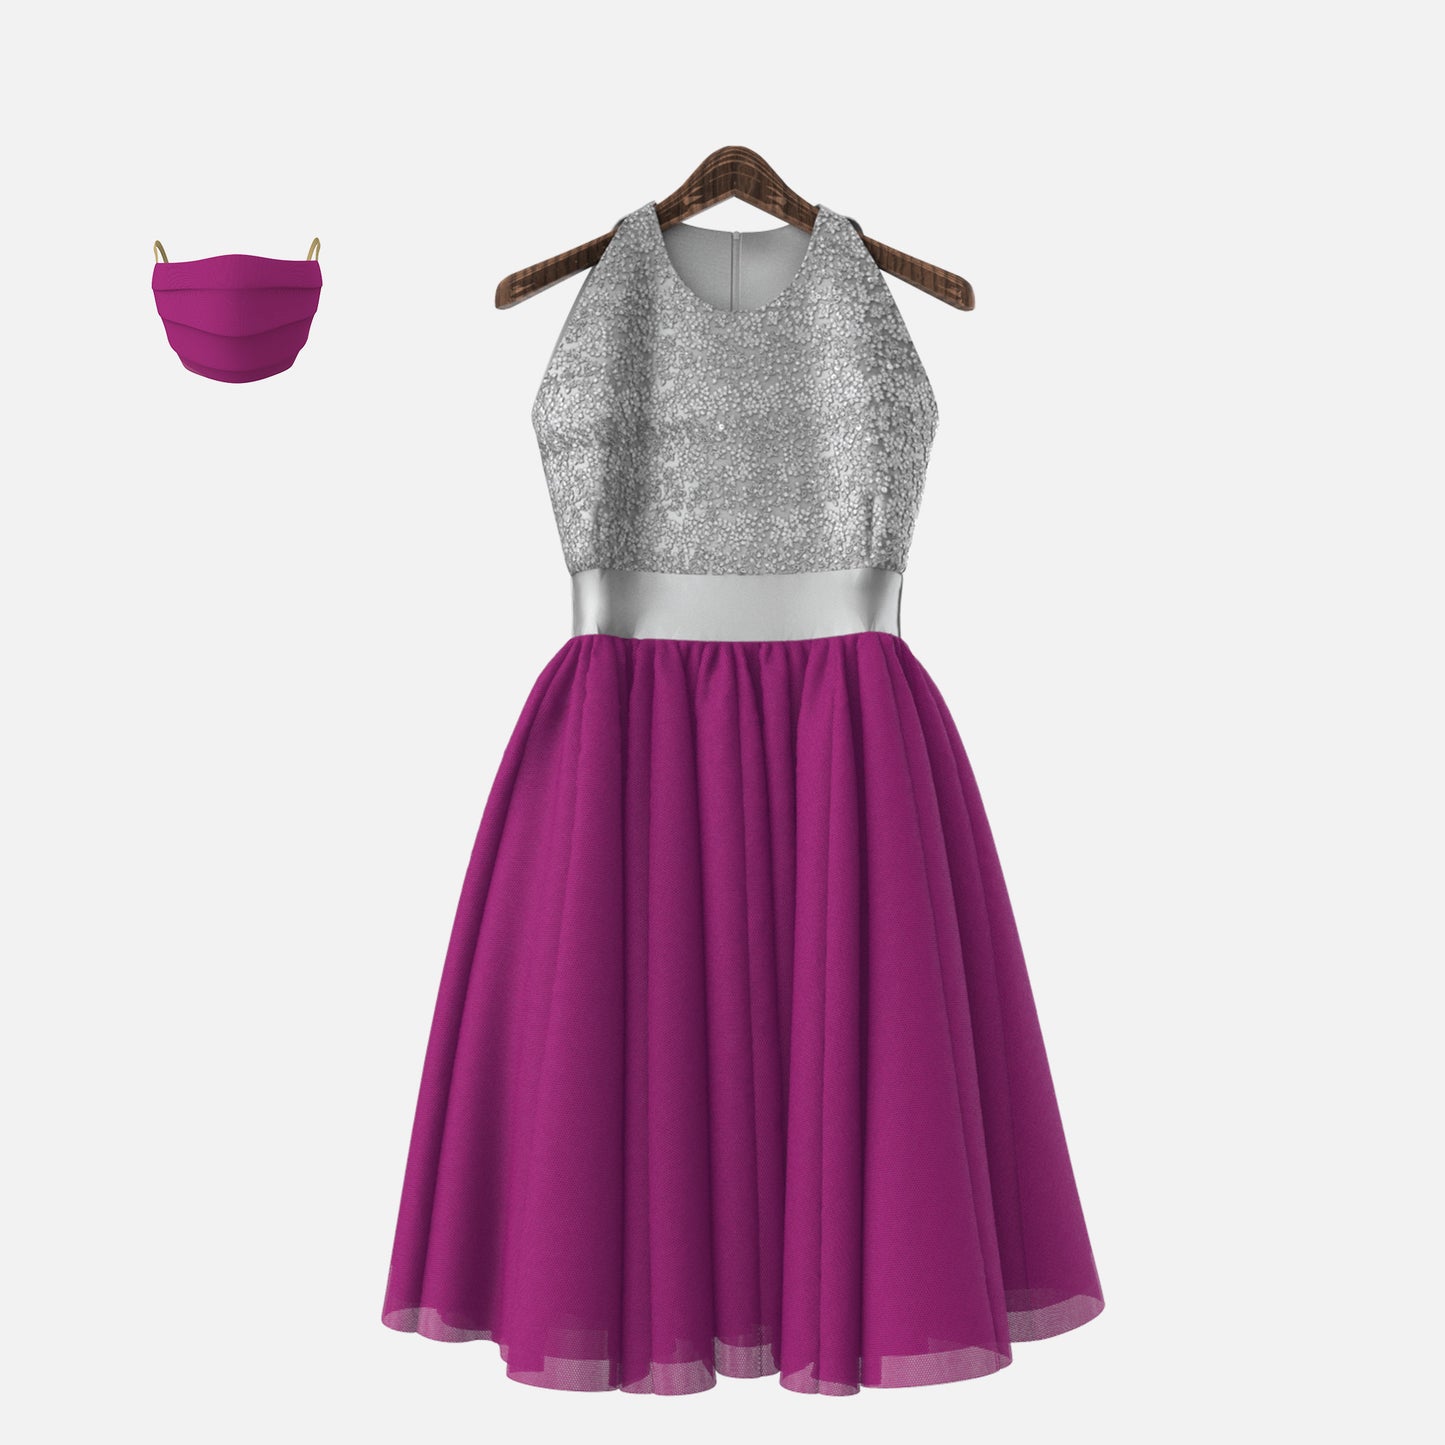 Shop Birthday frocks online Unique designer dresses for kids girls at best price. party wear frock for girls Shop for latest trendy party collections, exclusive kidswear at reasonable price India at heykidoo